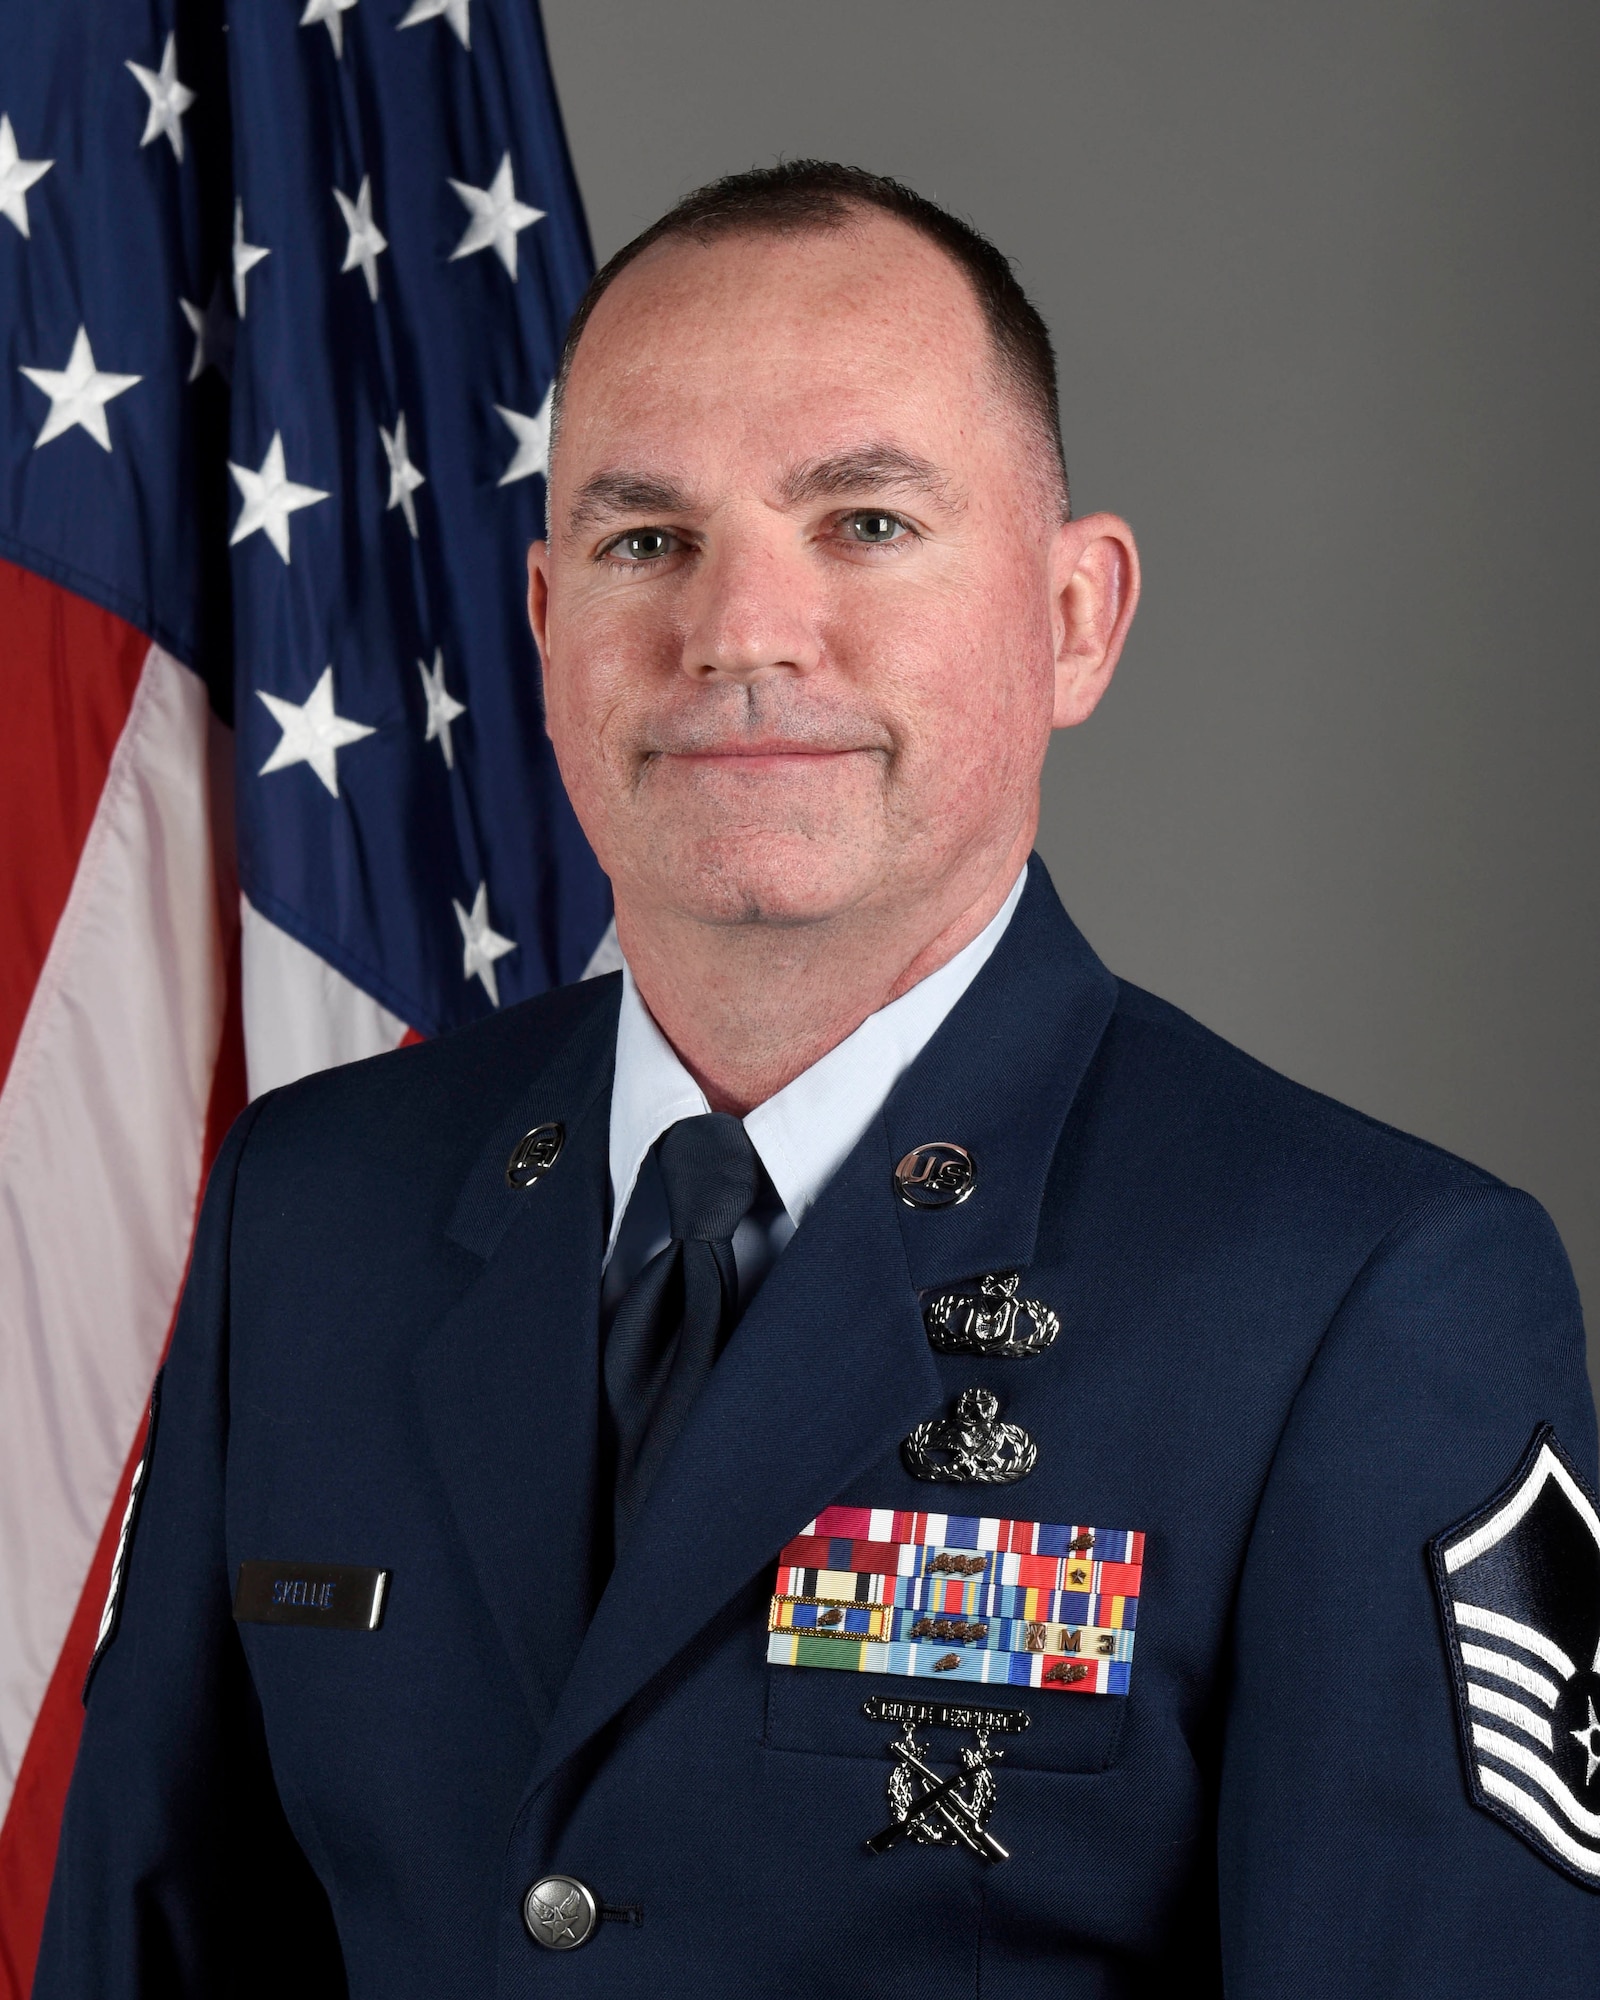 180th Fighter Wing’s 2019 Senior NCO of the Year: Master Sgt. Frank Skellie